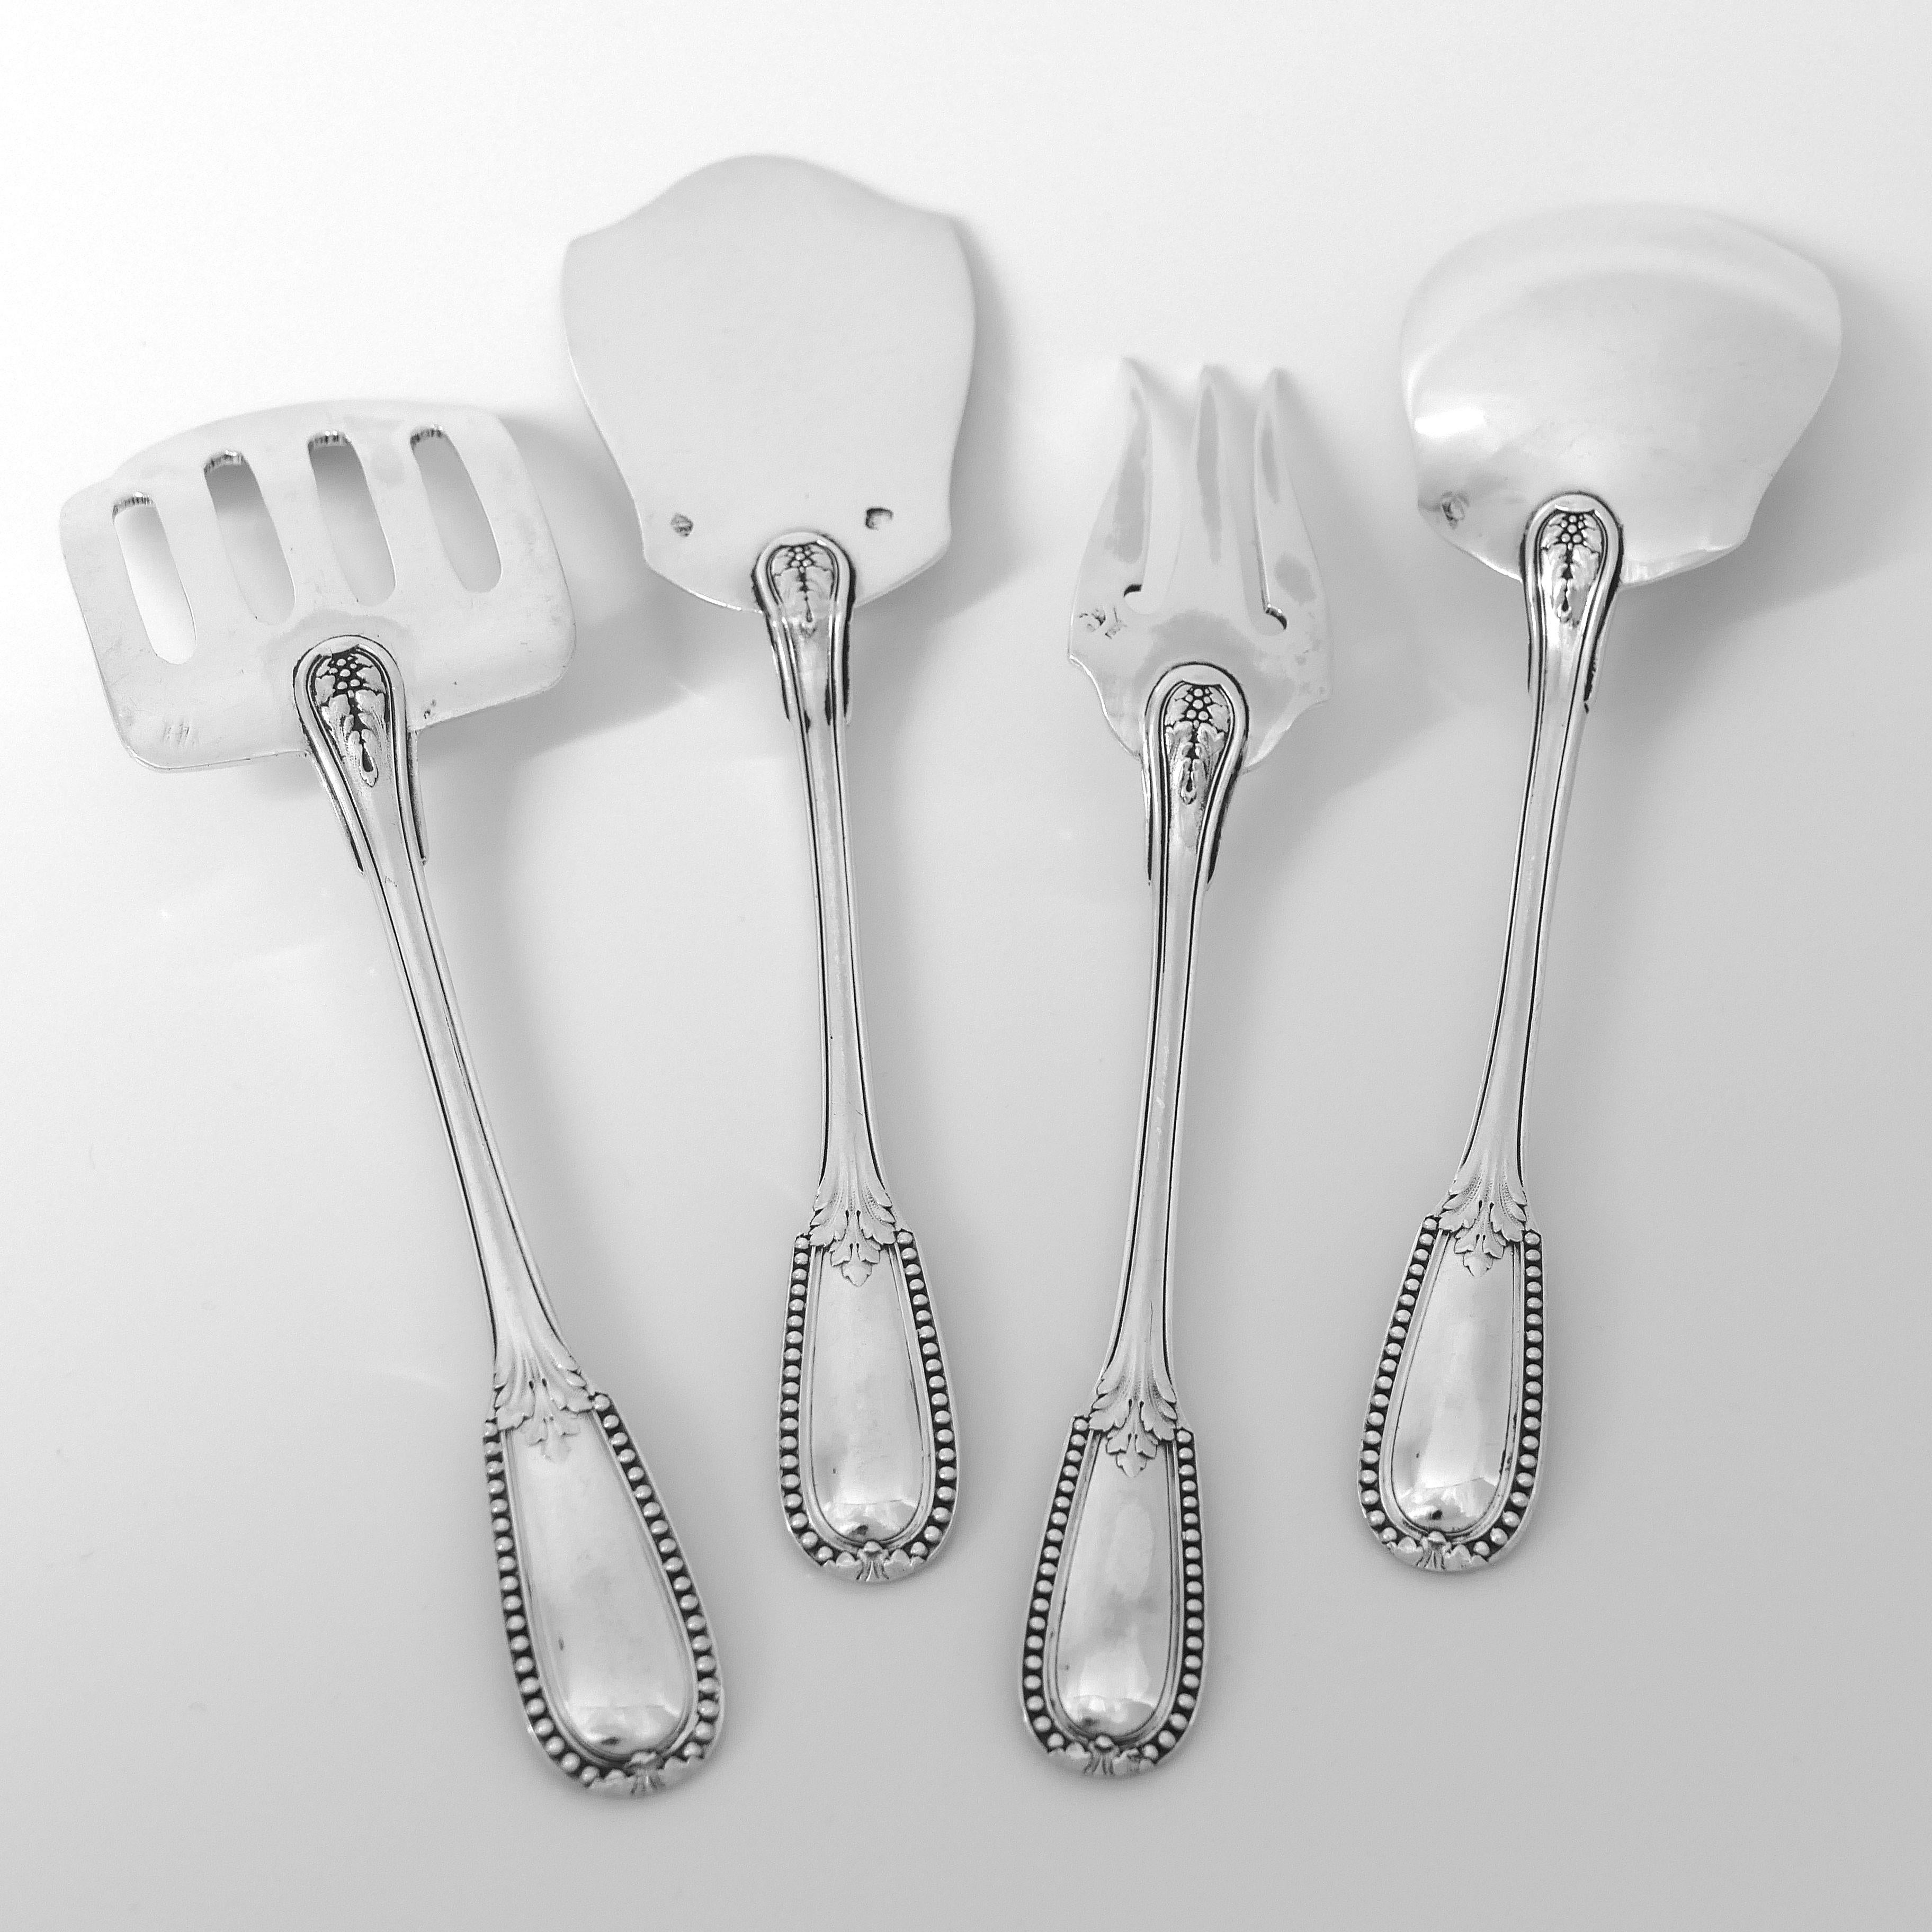 Puiforcat French All Sterling Silver Hors D'oeuvre Dessert 4-Piece, Neoclassical For Sale 4